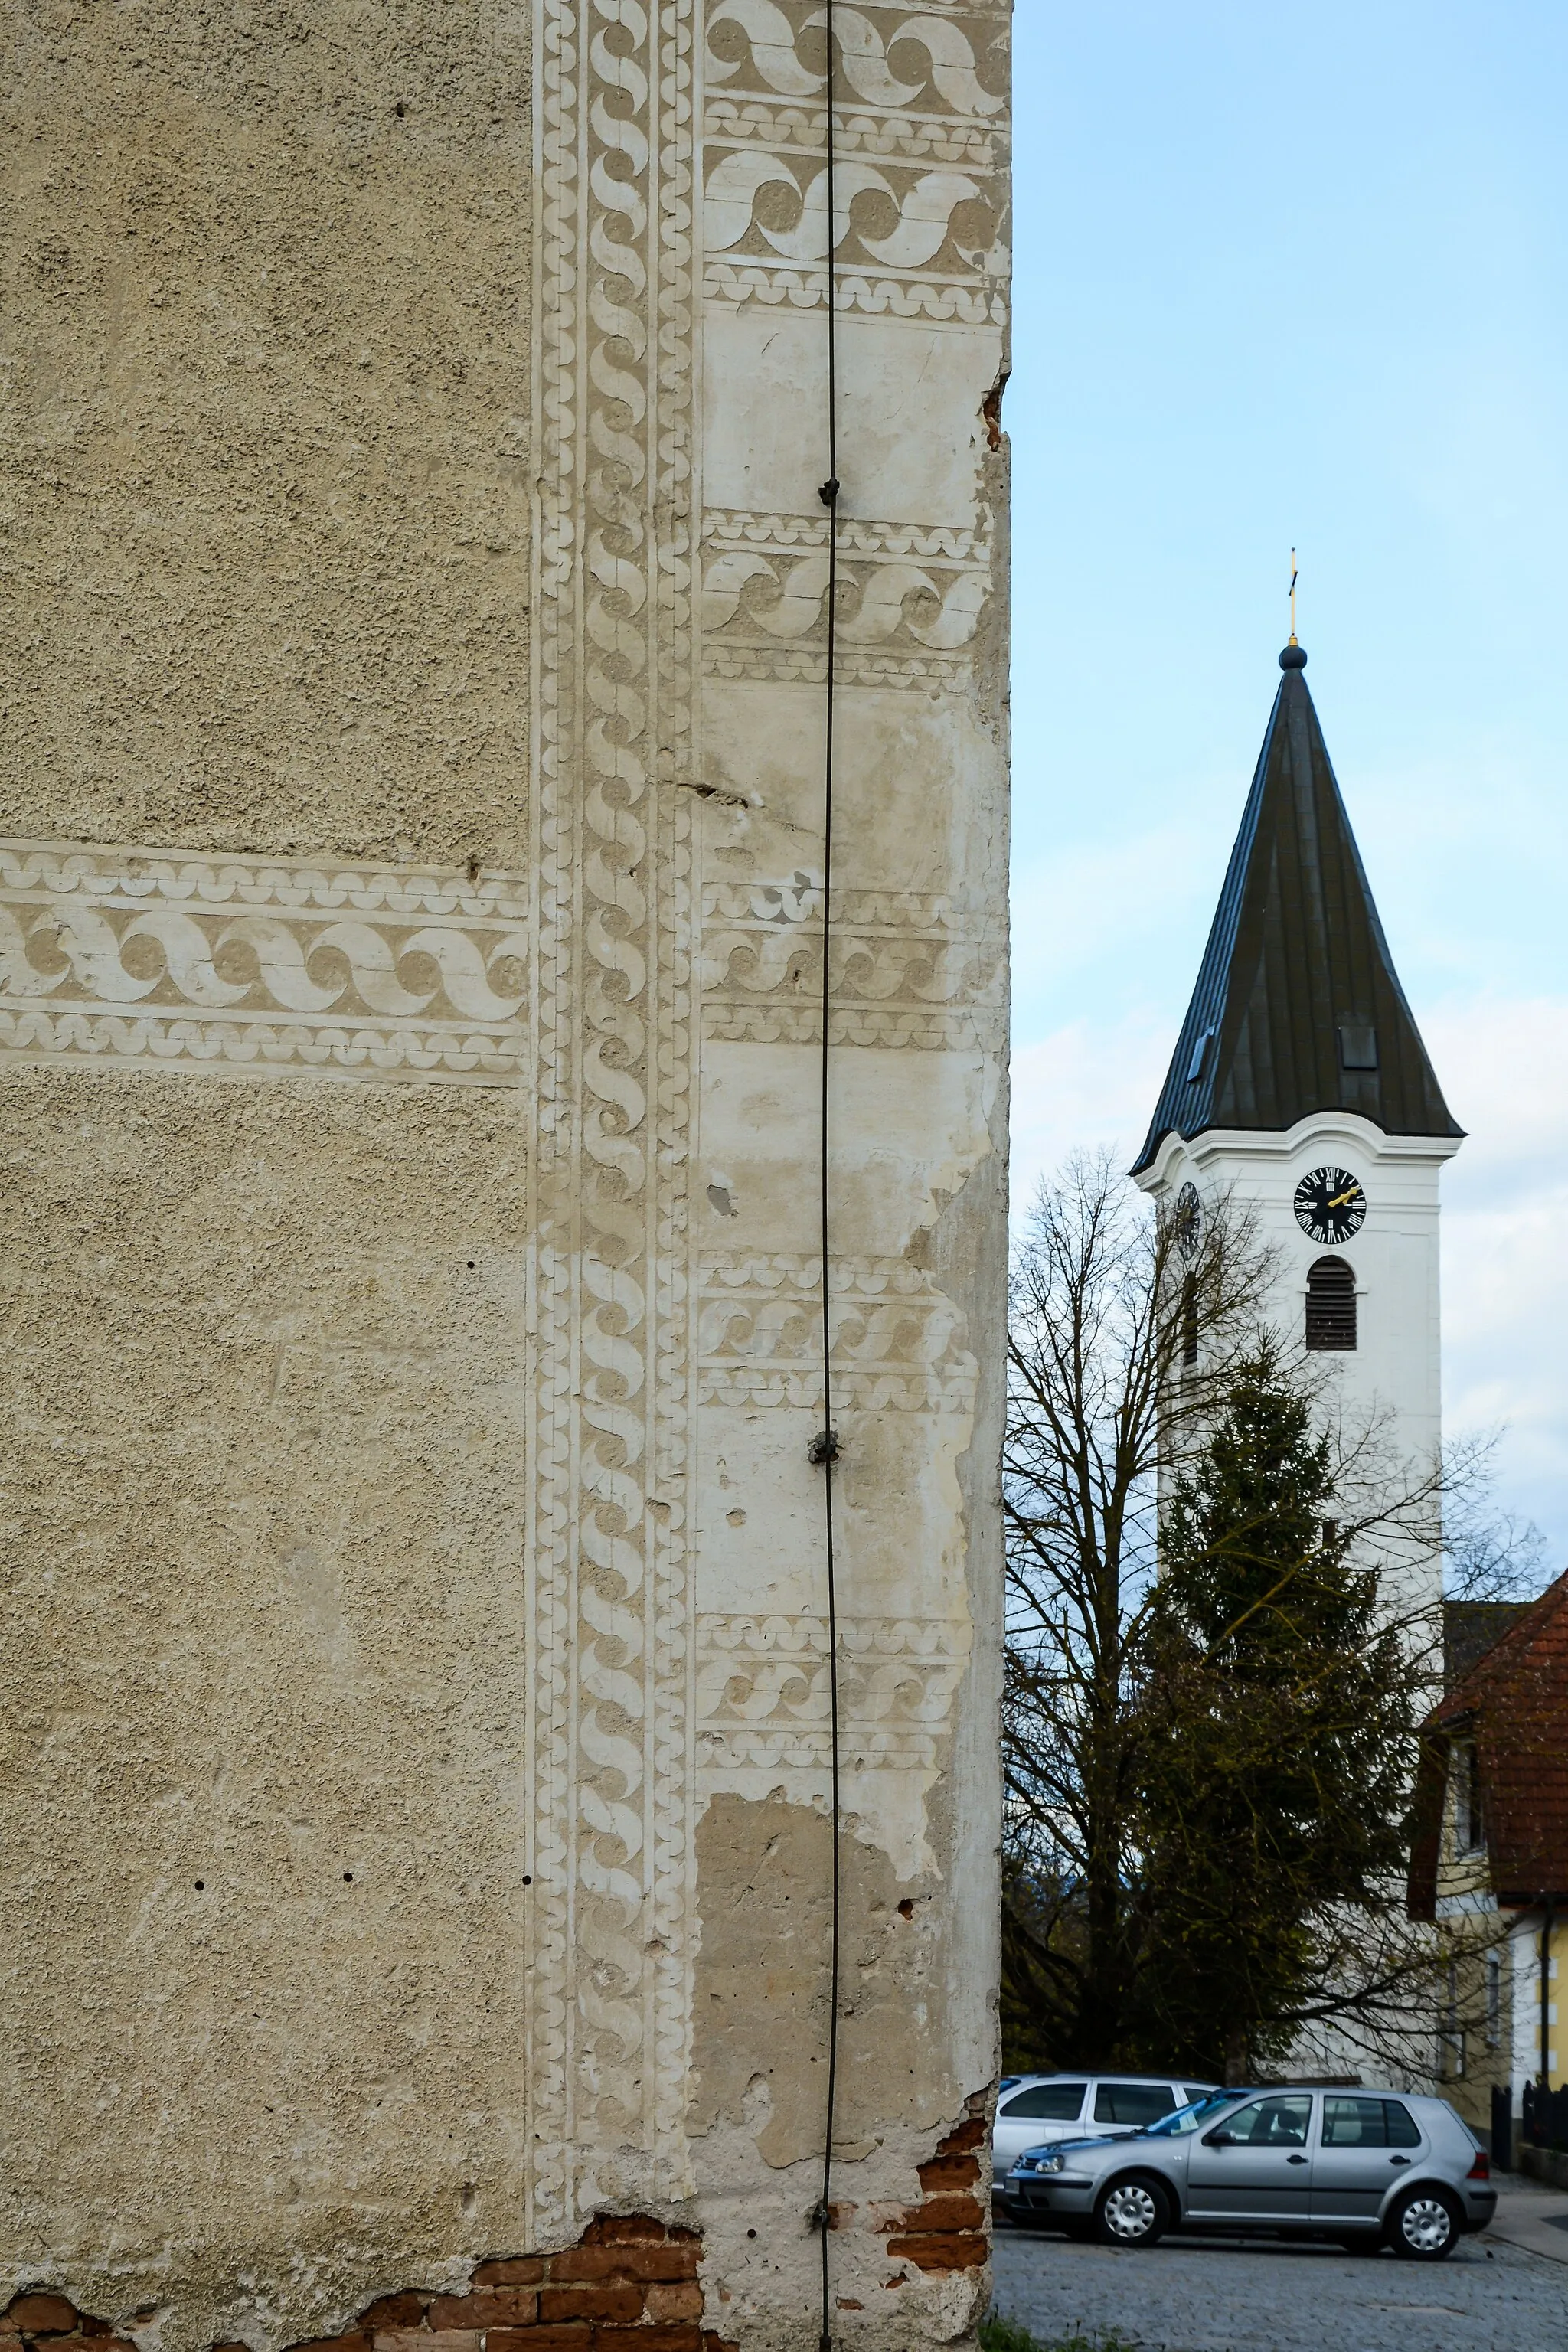 Photo showing: The church spire of the cath. parish church in Berg (Ansfelden) with the corner of the farm house "Zehetner" which is decorated with sgraffiti.